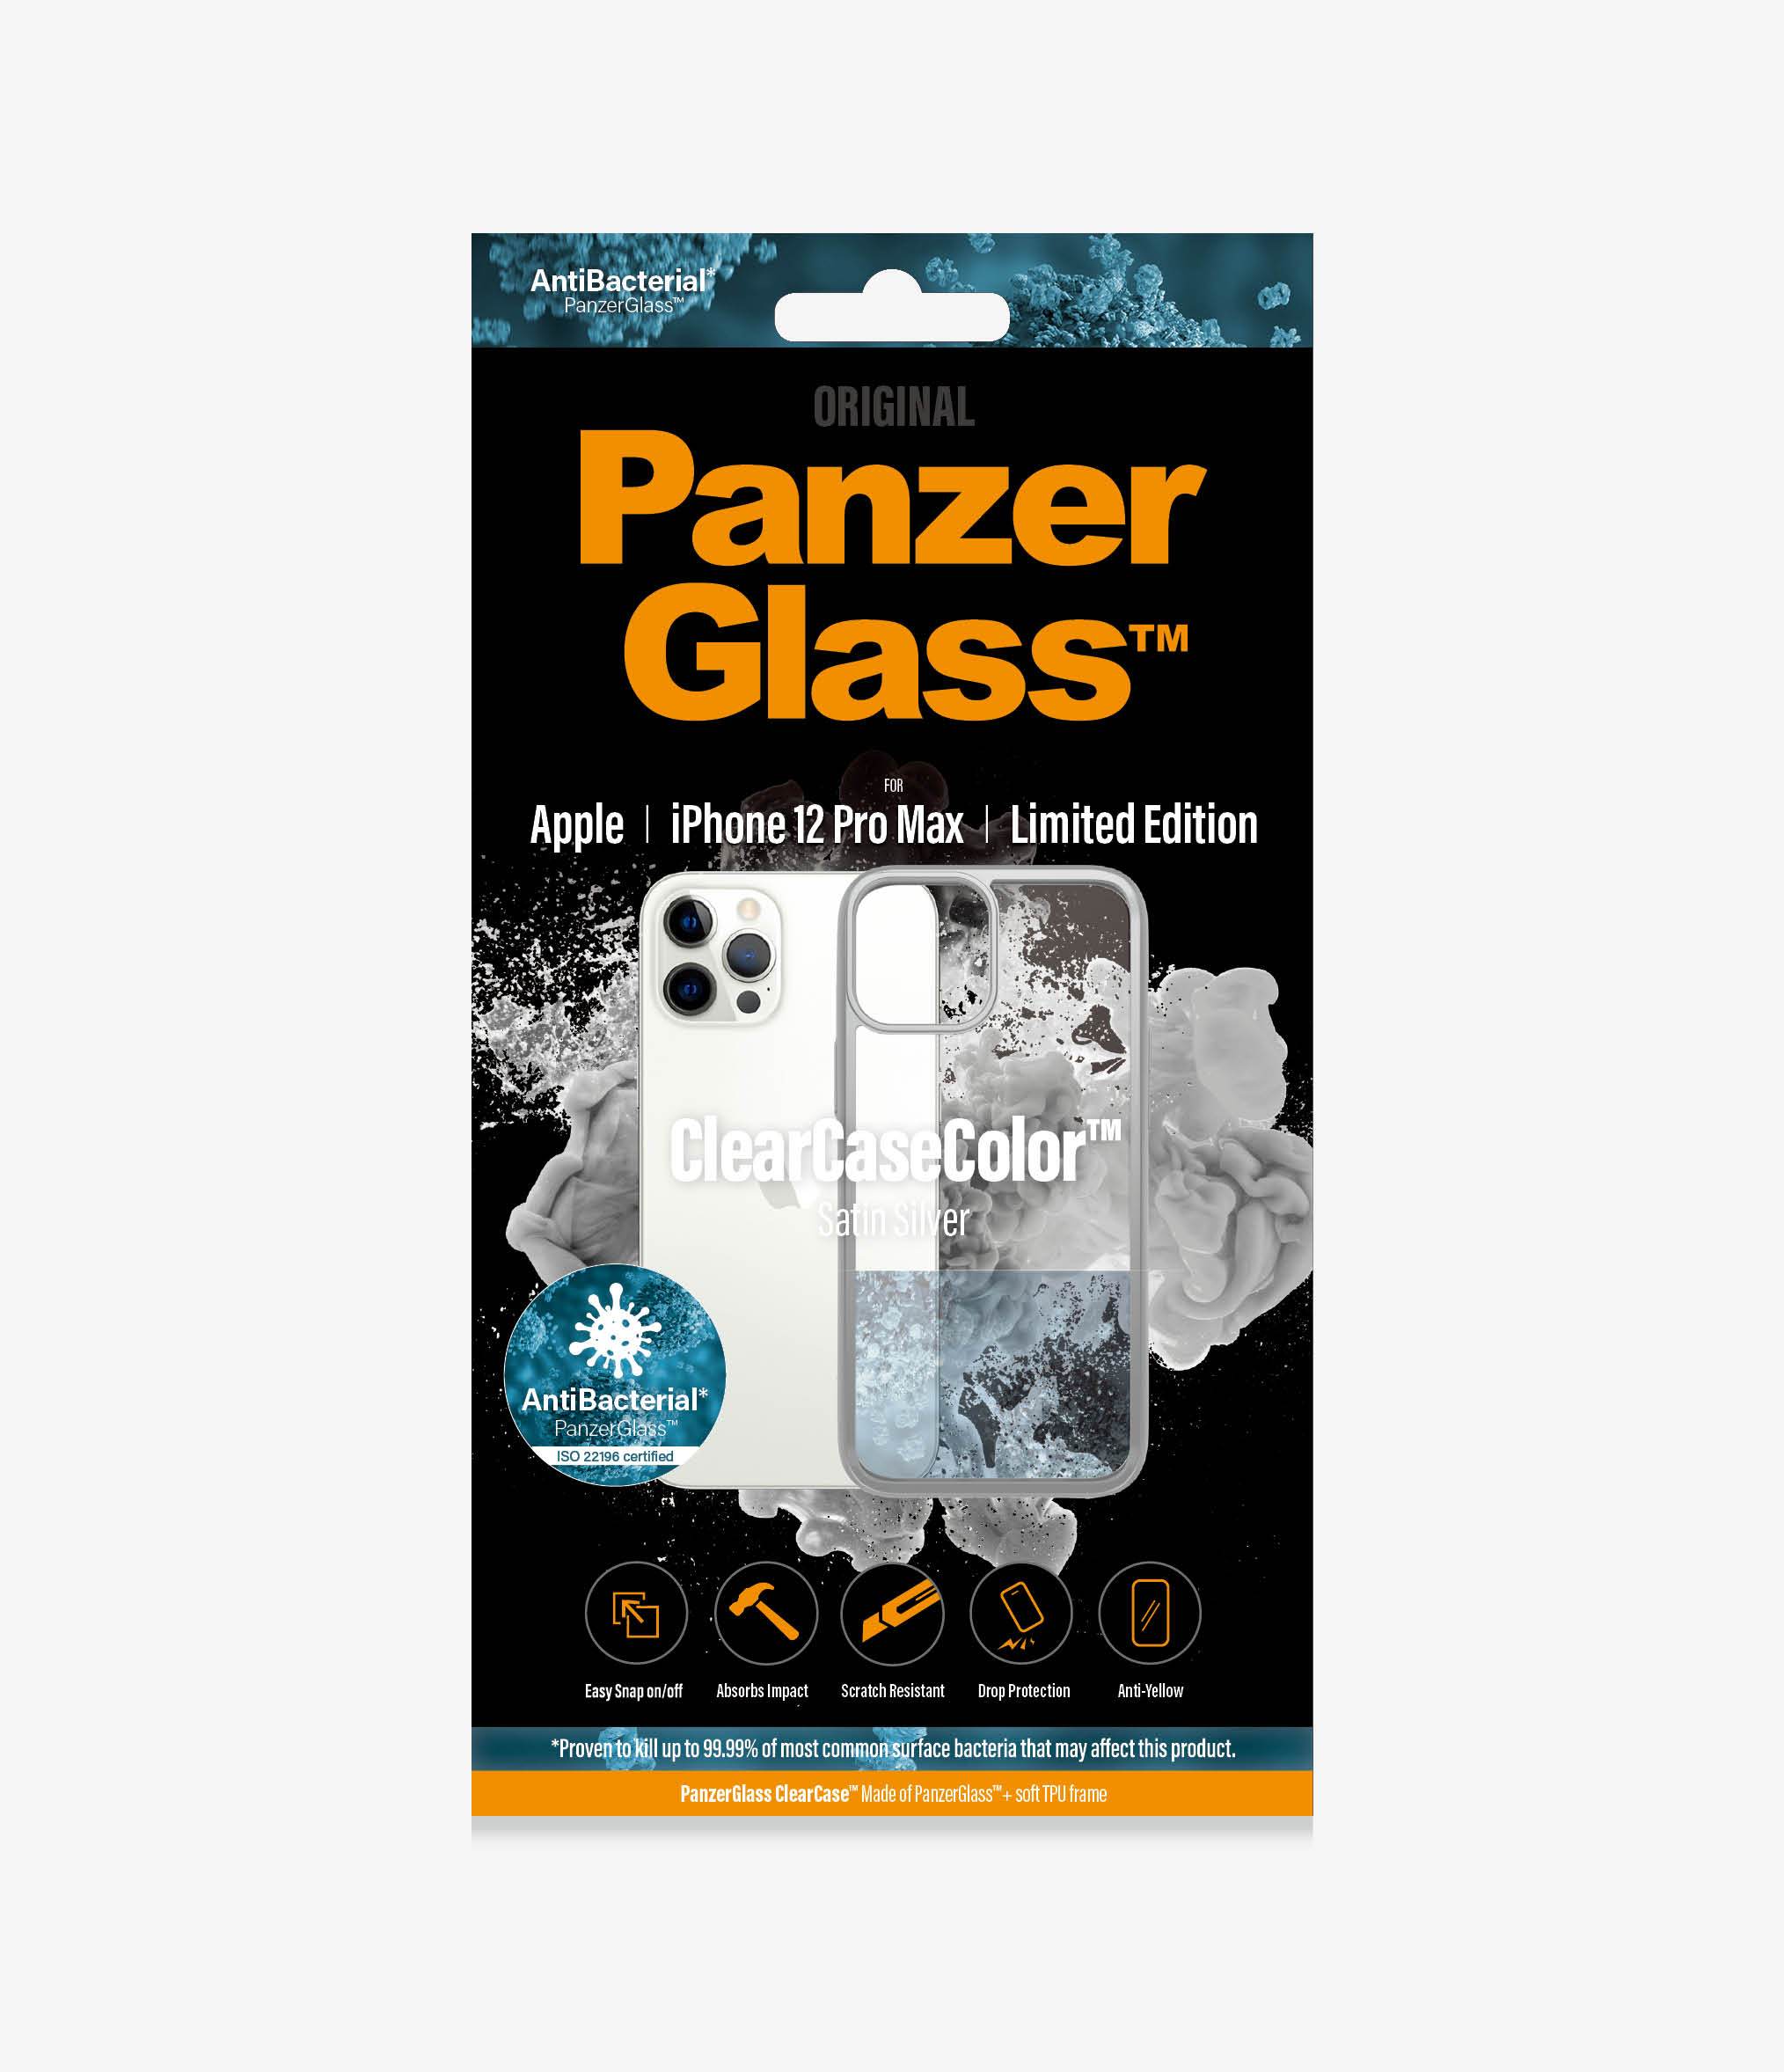 PanzerGlass™ ClearCaseColor™ Apple iPhone 12 Pro Max - Satin Silver Limited Edition (0272), Slim fashionable design, Tempered anti-aging glass back